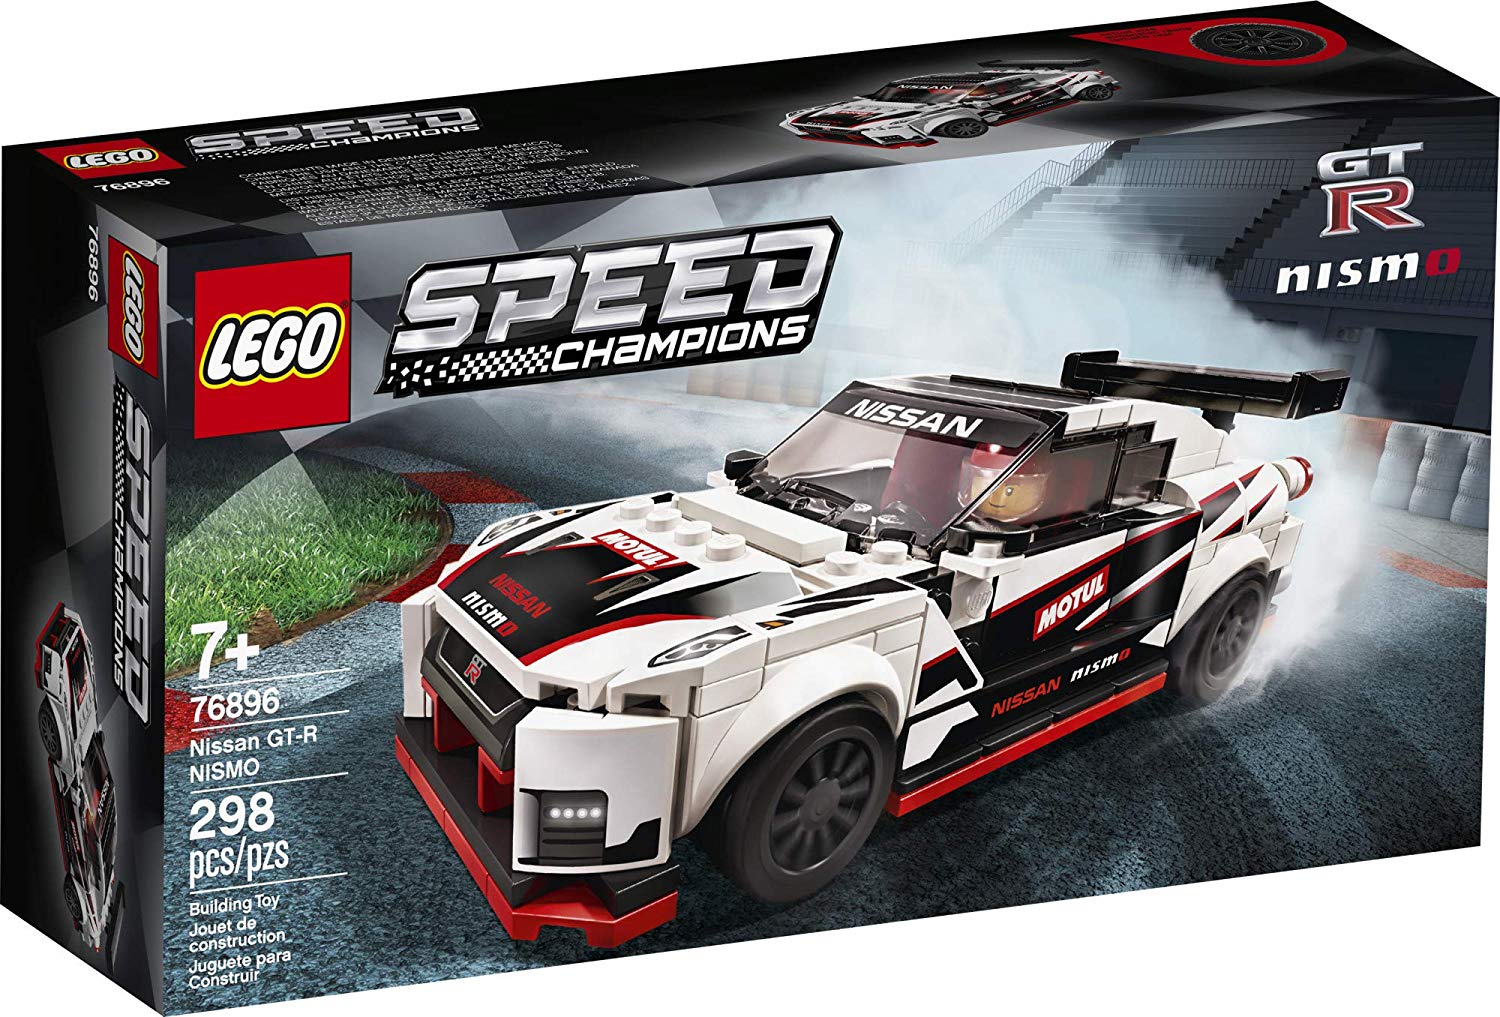 Lego 76896 Nissan GT-R NISMO Speed Champions New with Box - image 1 of 5